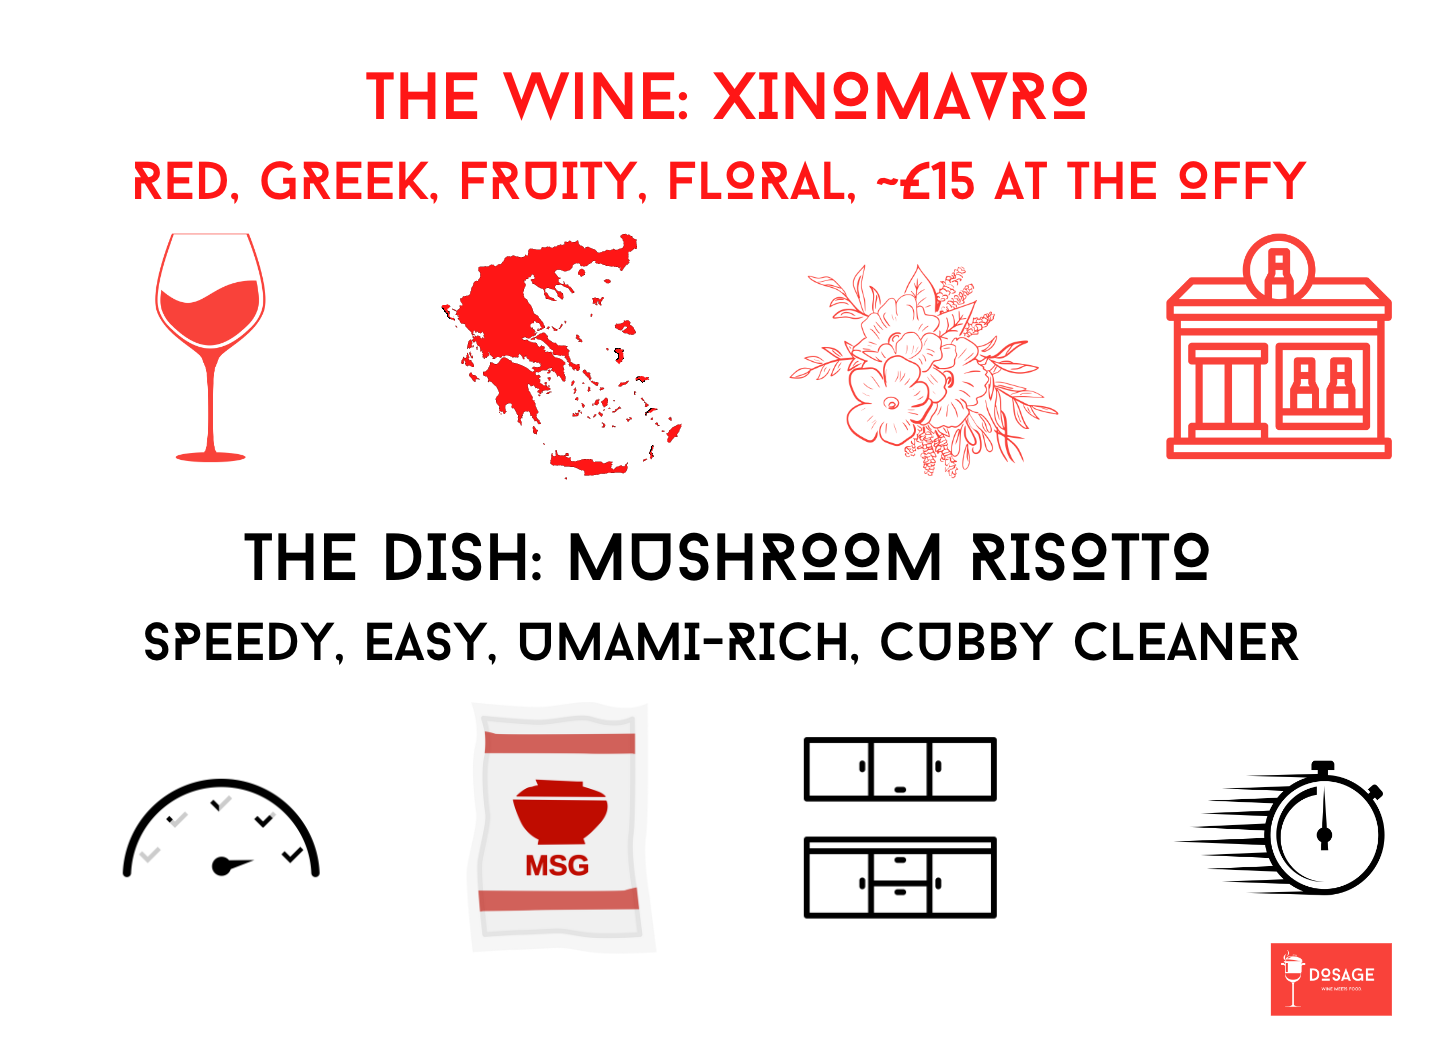 Infographic showing some information on the greek red wine ximomavro, and how this is an excellent food pairing option for risotto that's cheaper than a barolo